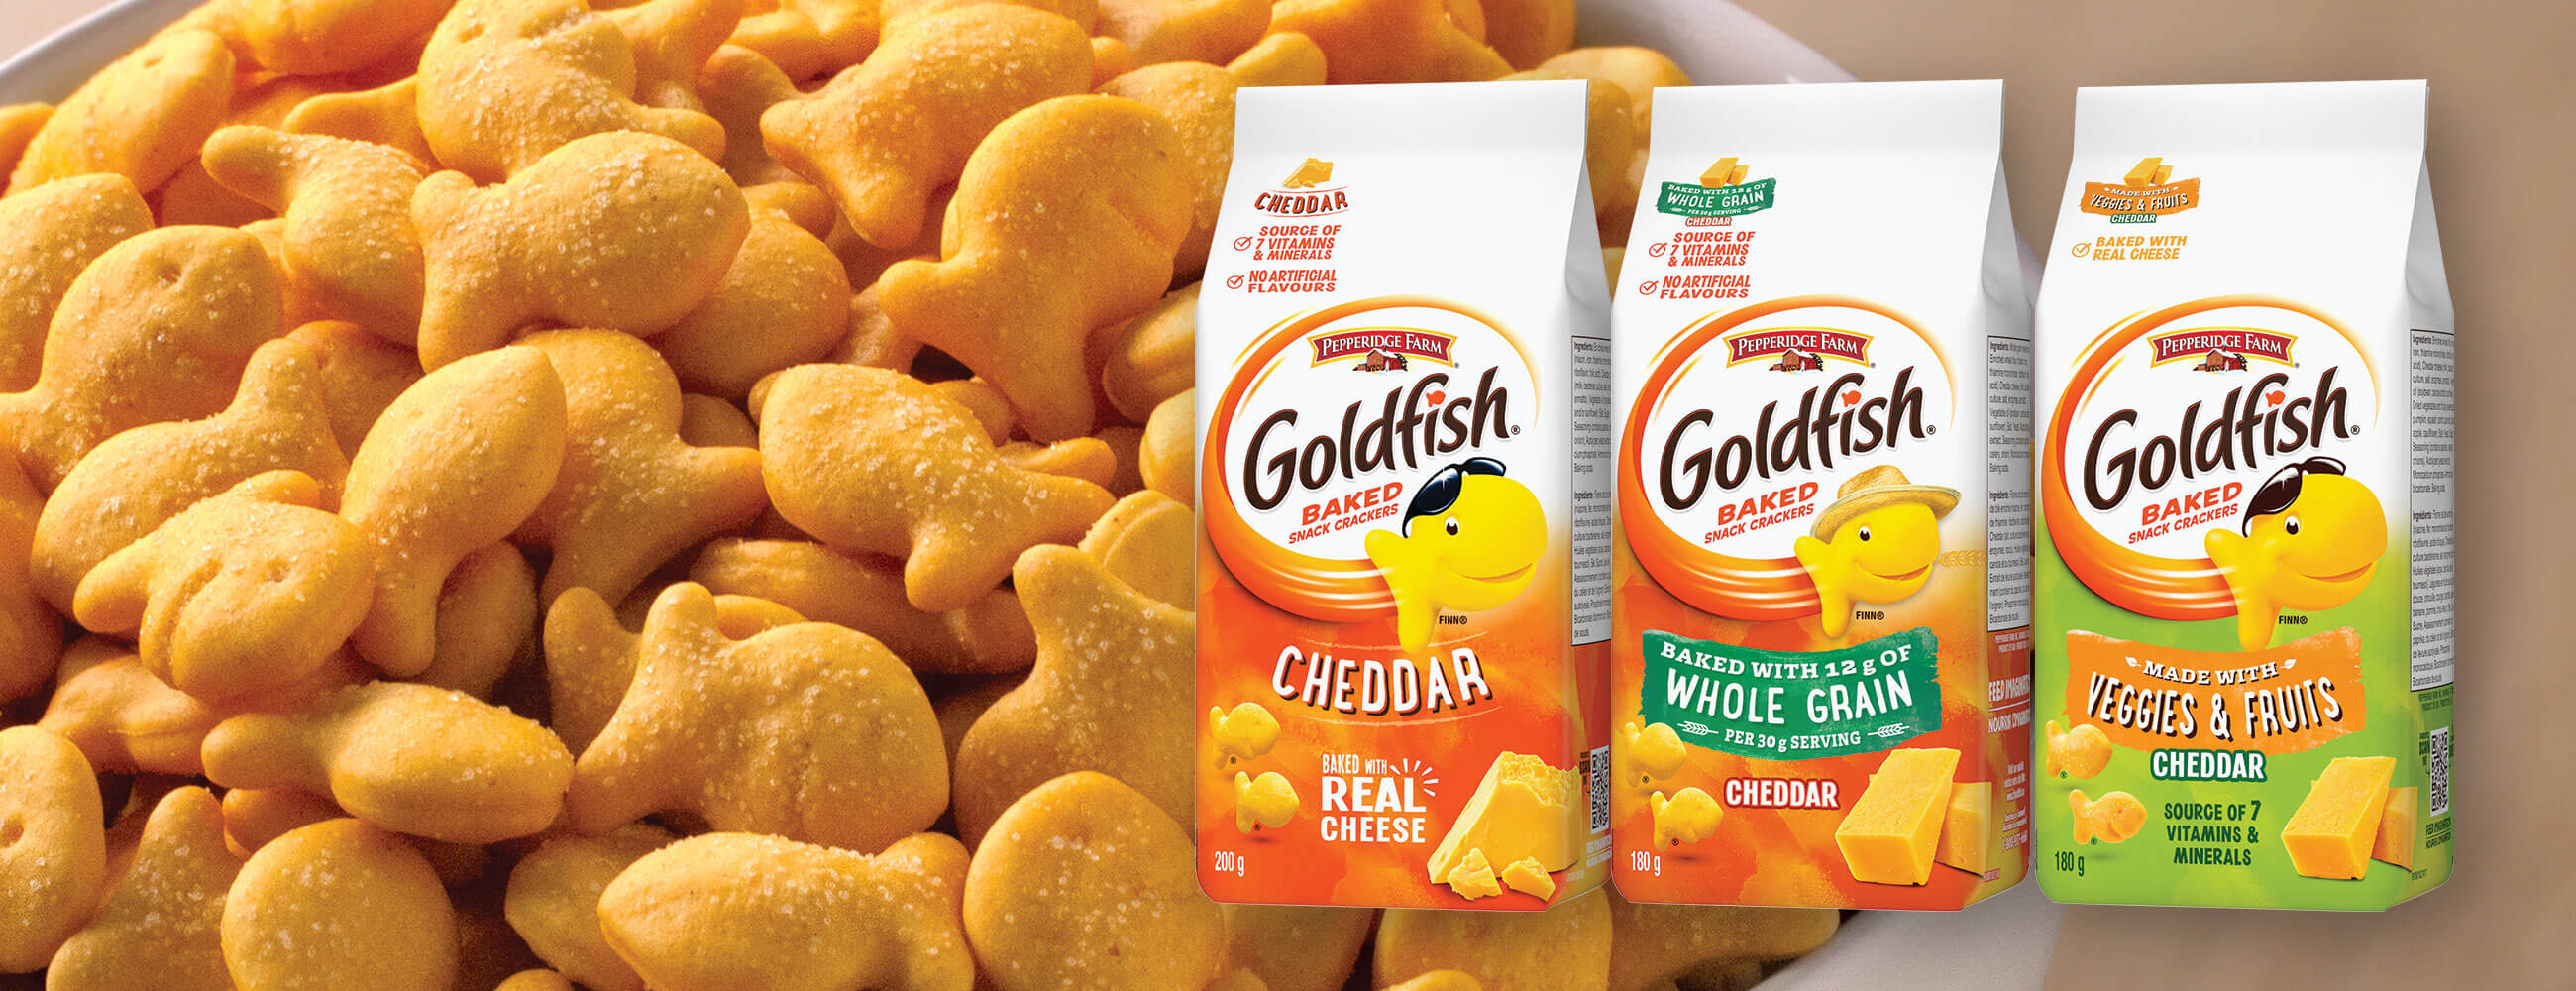 Goldfish® Cheddar, Whole Grain and Veggies & Fruits packaging with bowl of Goldfish® crackers in background